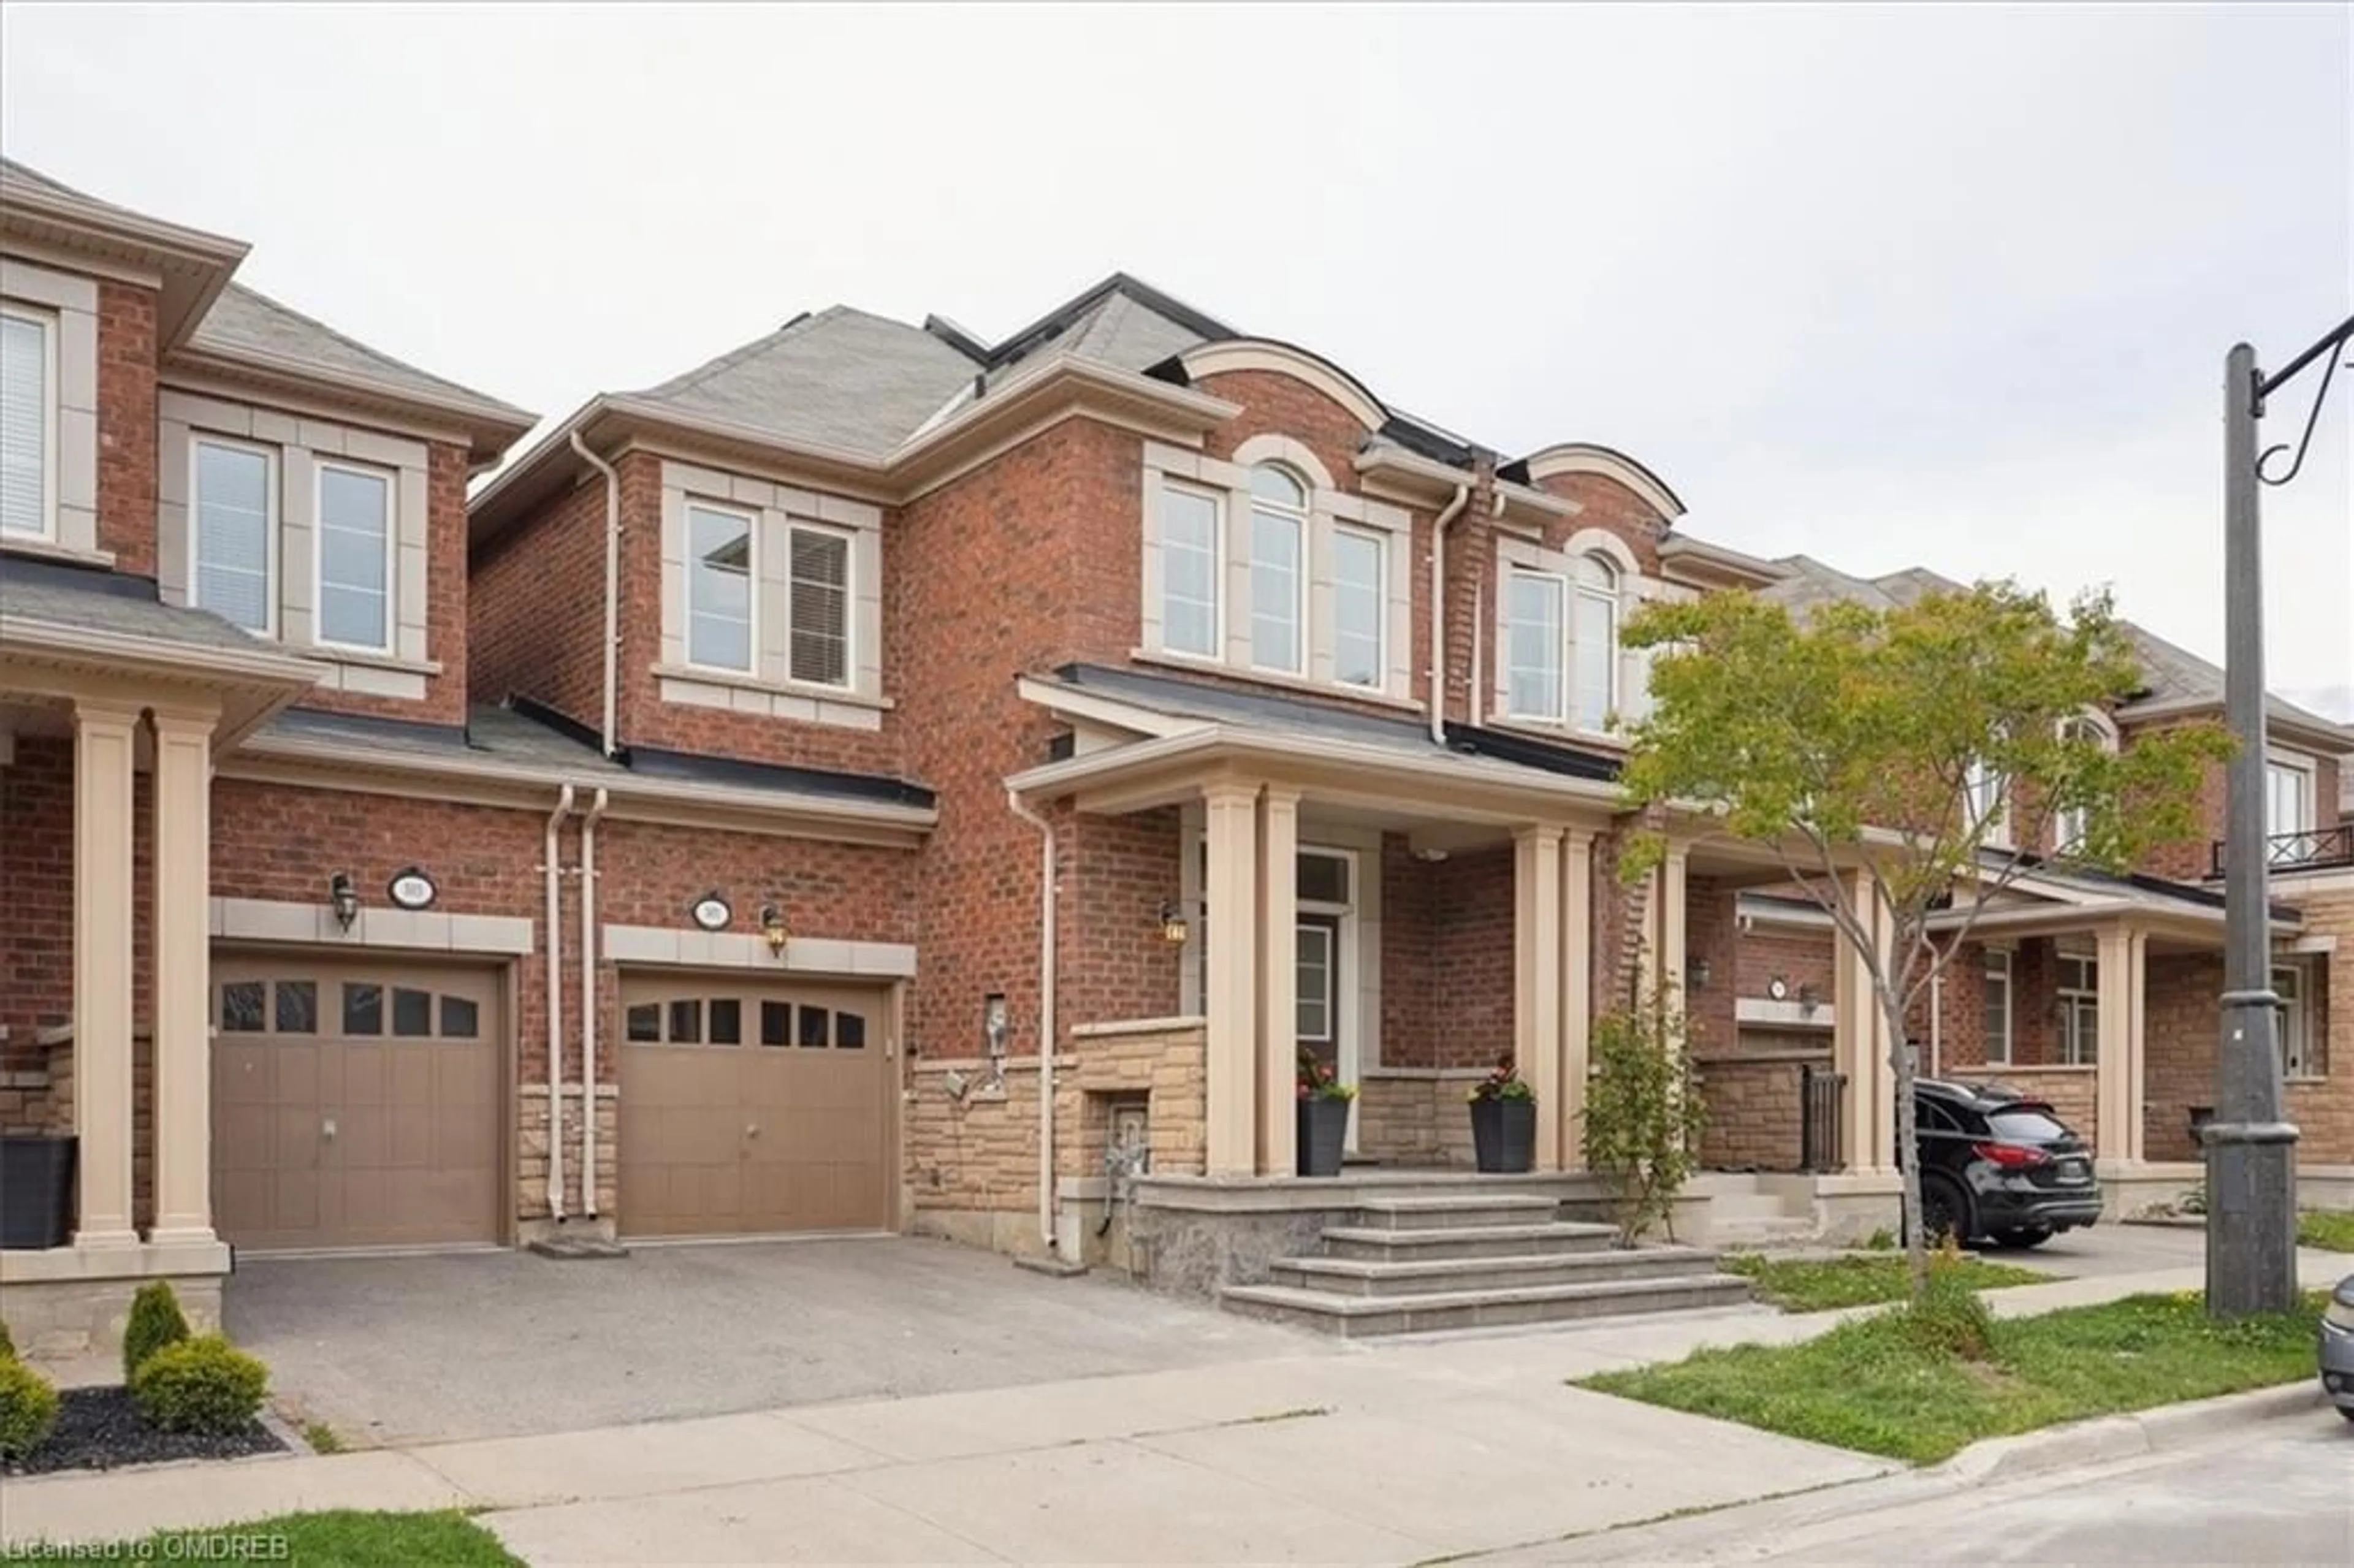 Home with brick exterior material for 301 Sarah Cline Dr, Oakville Ontario L6M 0V7